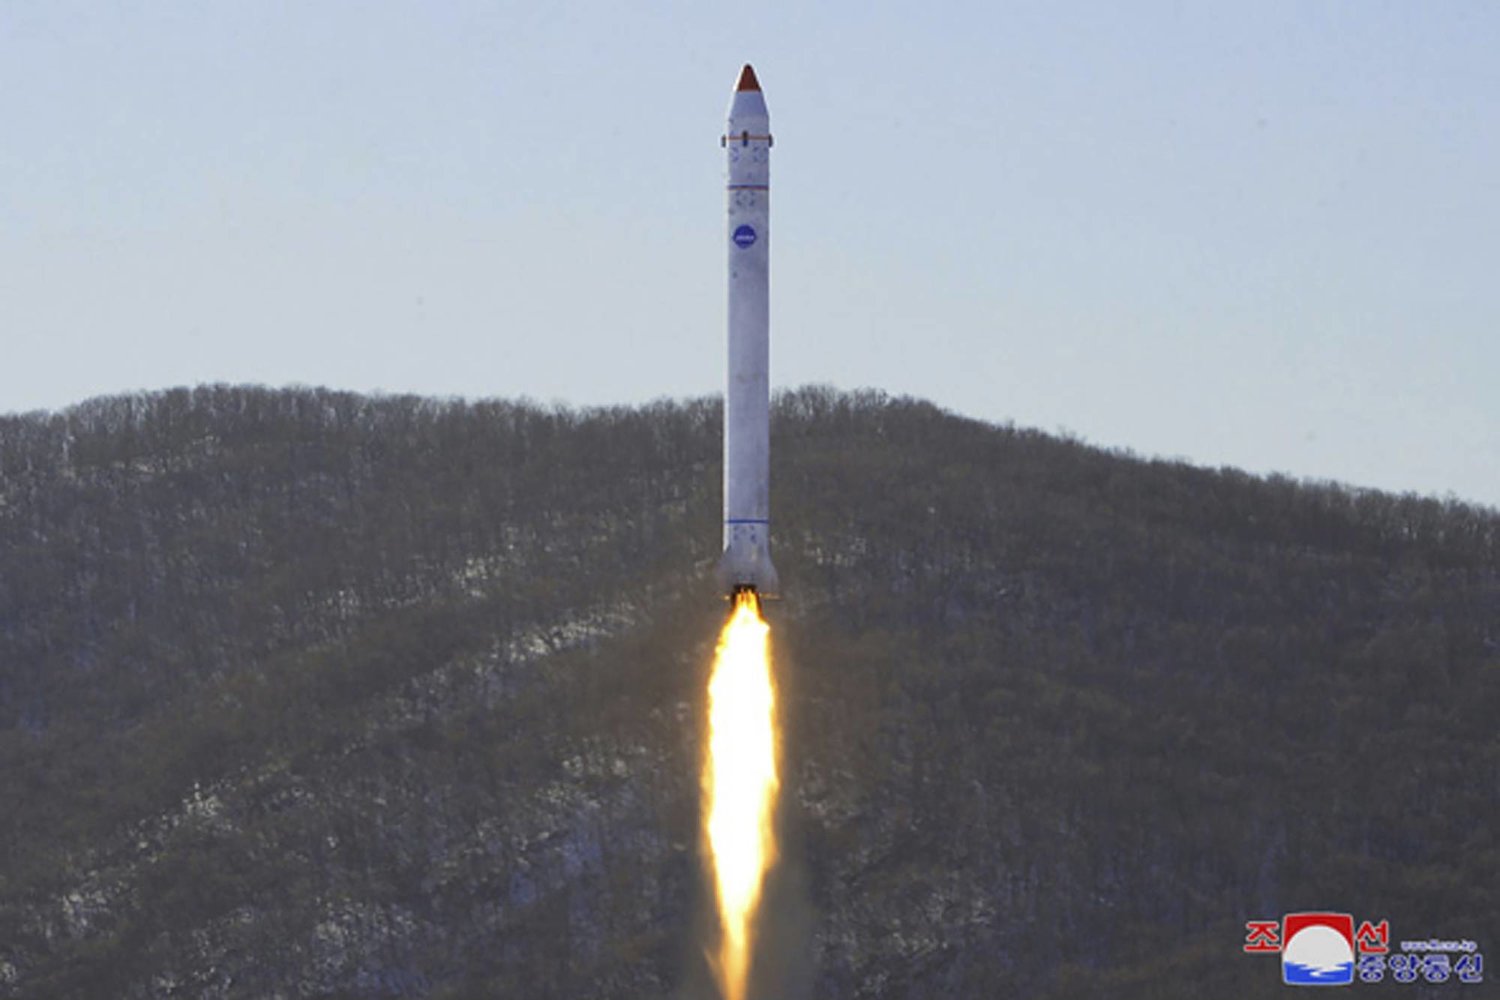 FILE - This photo provided by the North Korean government shows what it says is a test of a rocket with the test satellite at the Sohae Satellite Launching Ground in North Korea on Dec. 18, 2022. (Korean Central News Agency/Korea News Service via AP, File)
